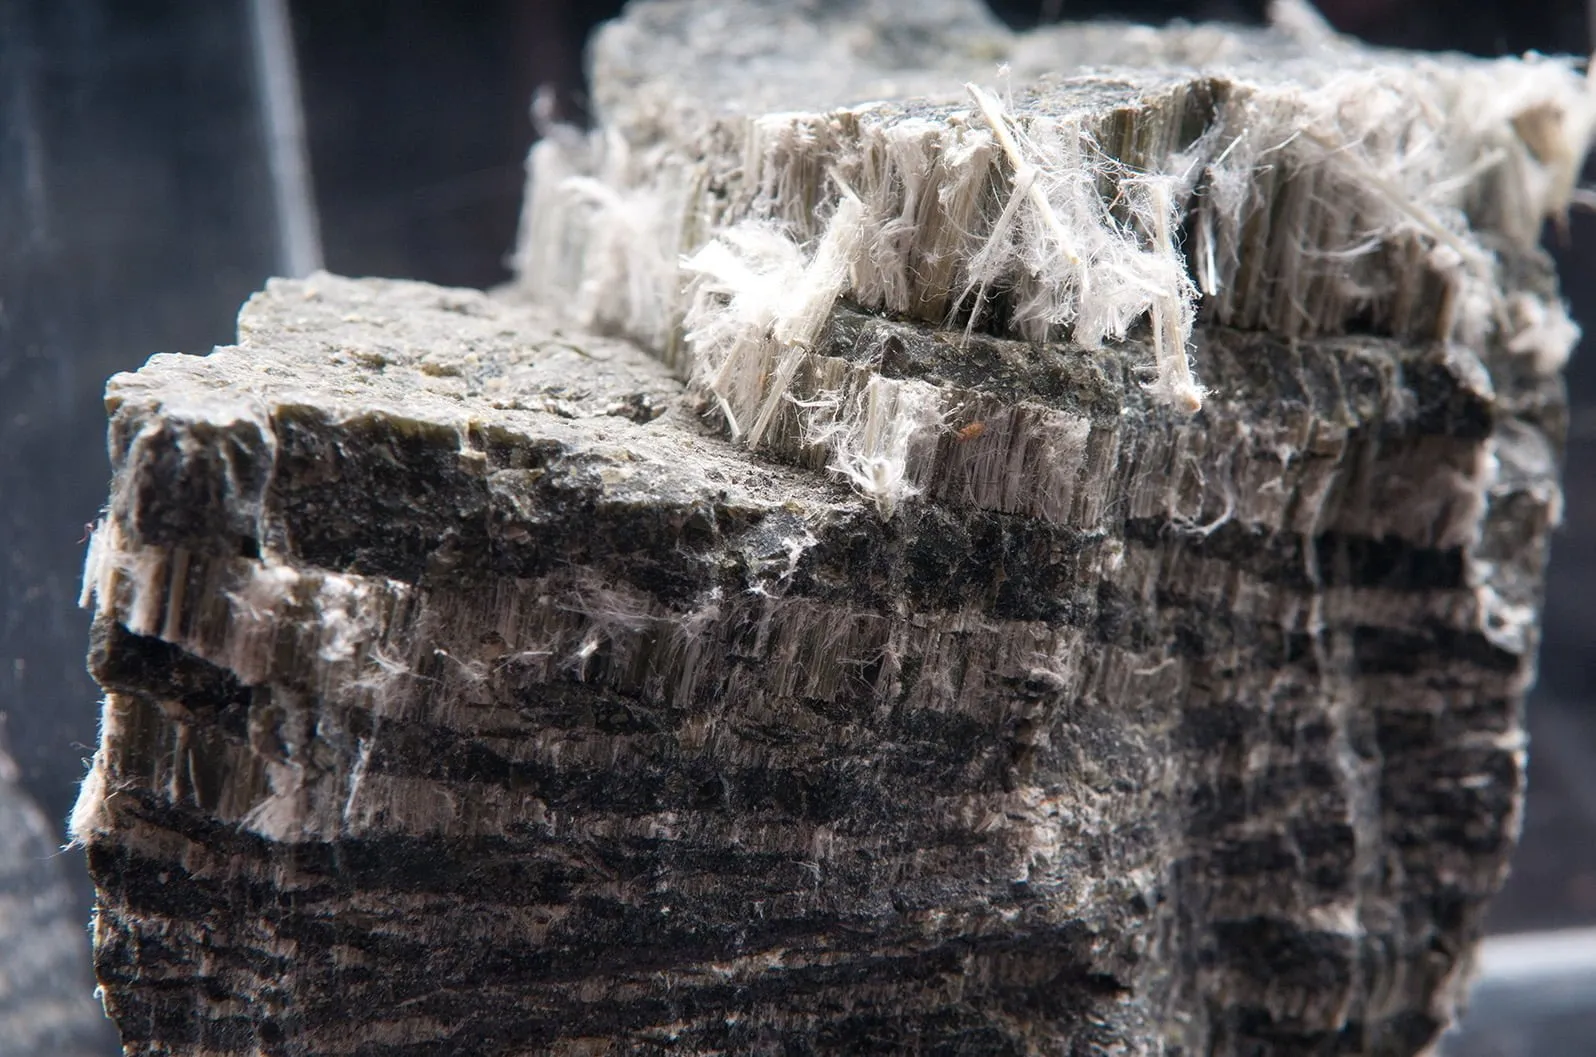 Asbestos fibers that cause mesothelioma. If you’ve been diagnosed with mesothelioma in Wyoming, our Wyoming mesothelioma attorneys can help you recover the compensation you deserve.